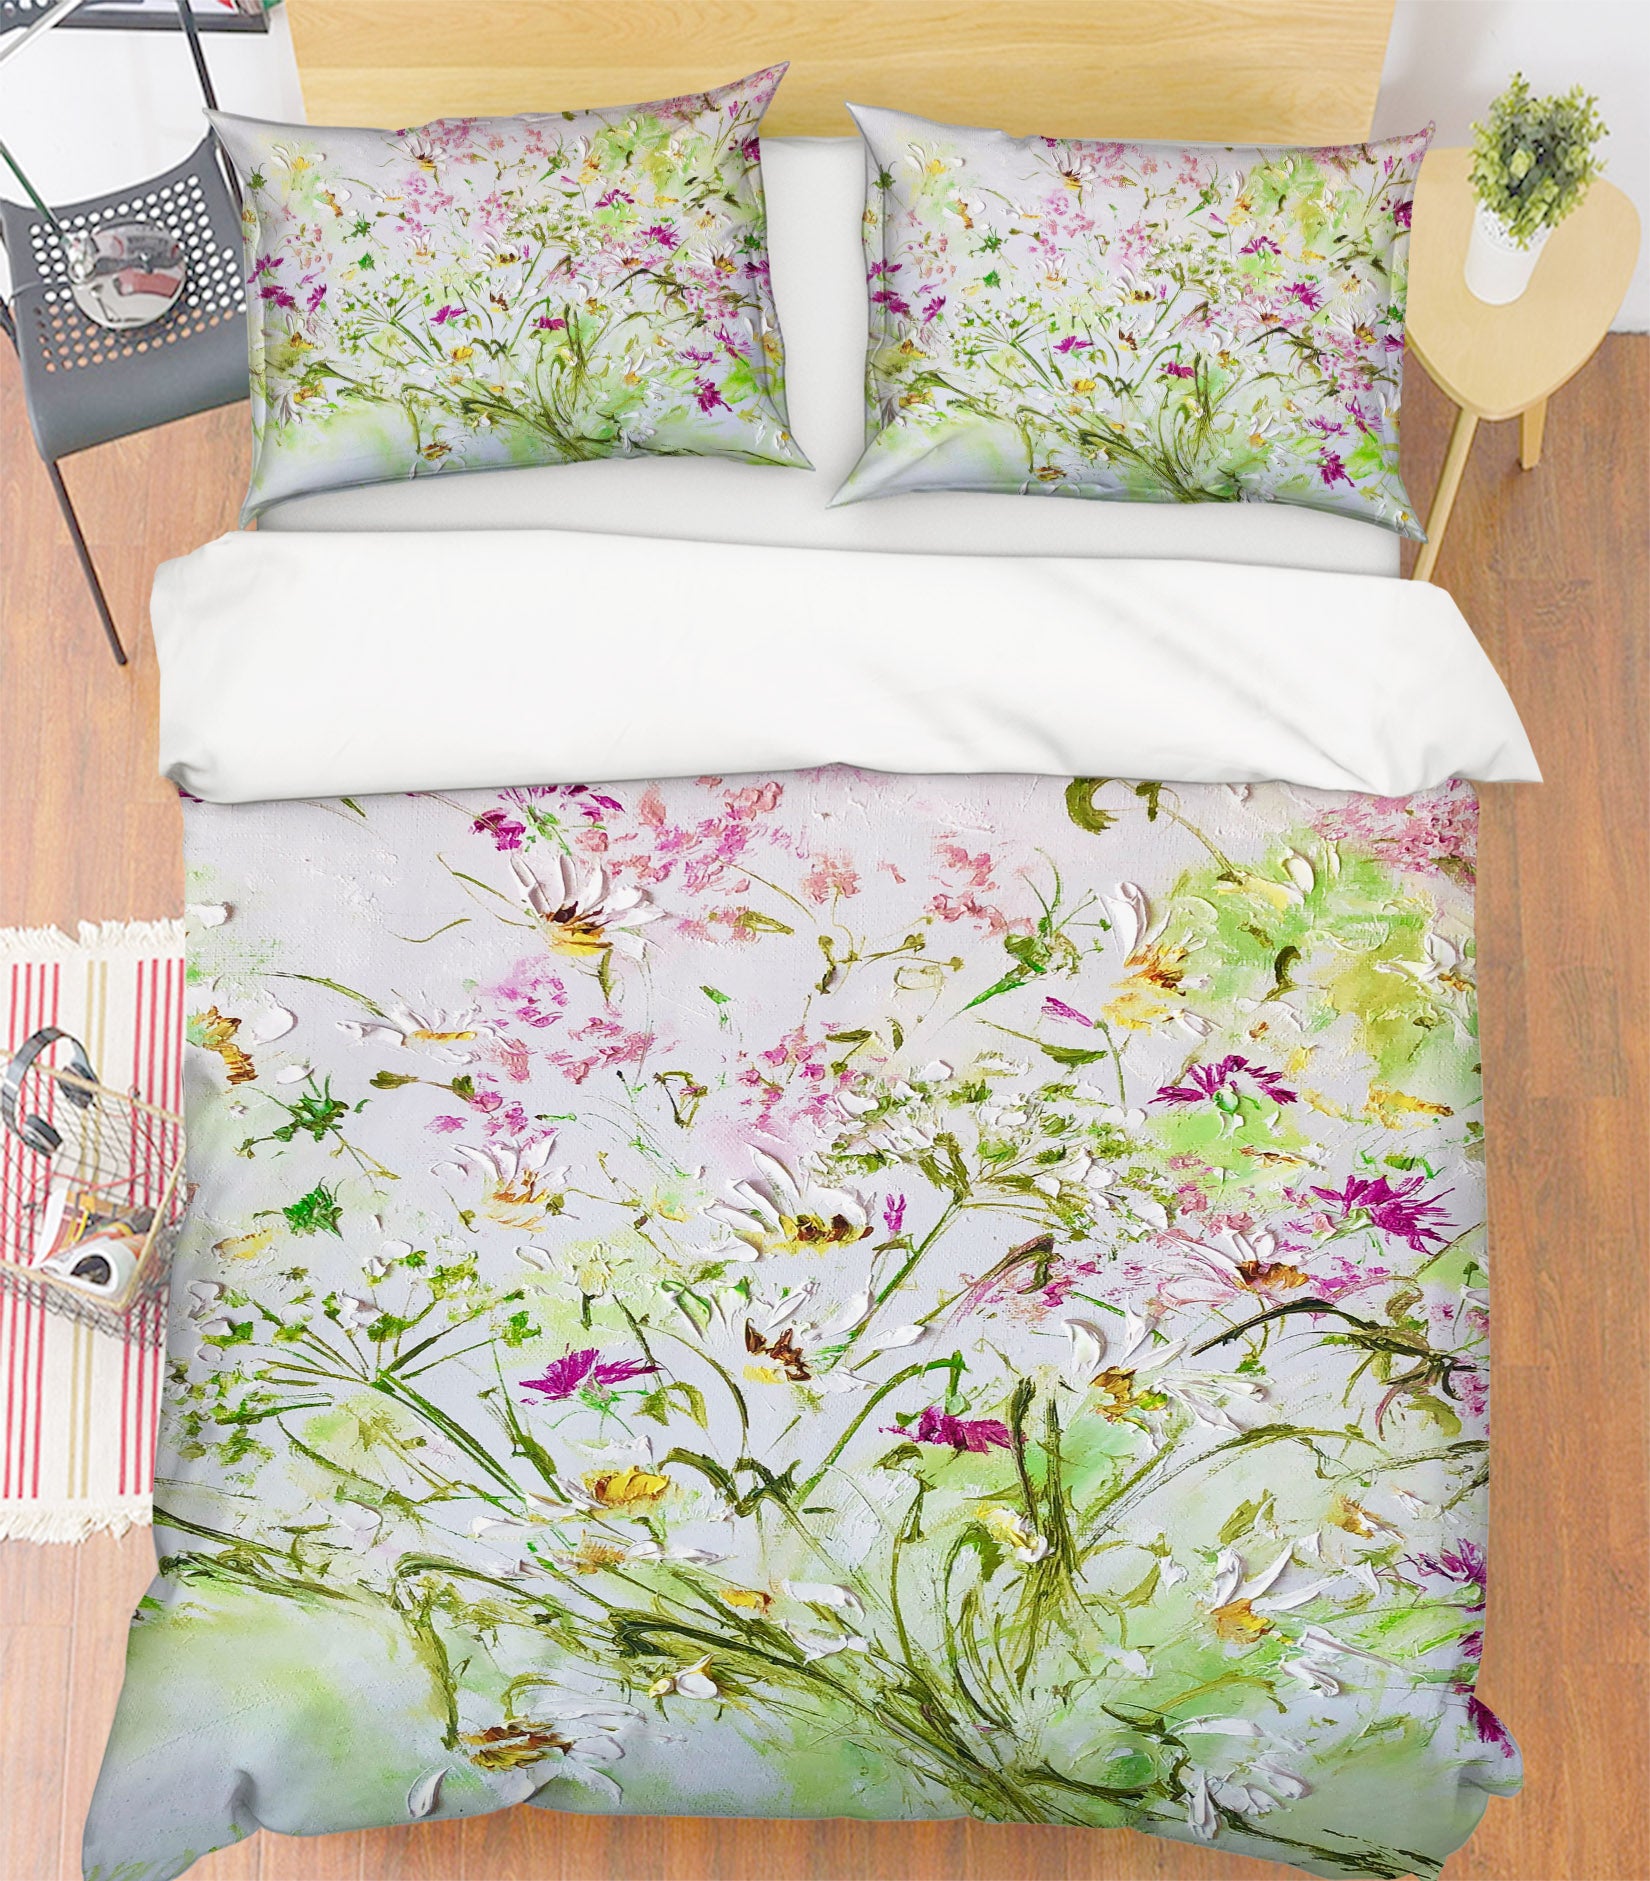 3D Watercolor Pink Flowers 521 Skromova Marina Bedding Bed Pillowcases Quilt